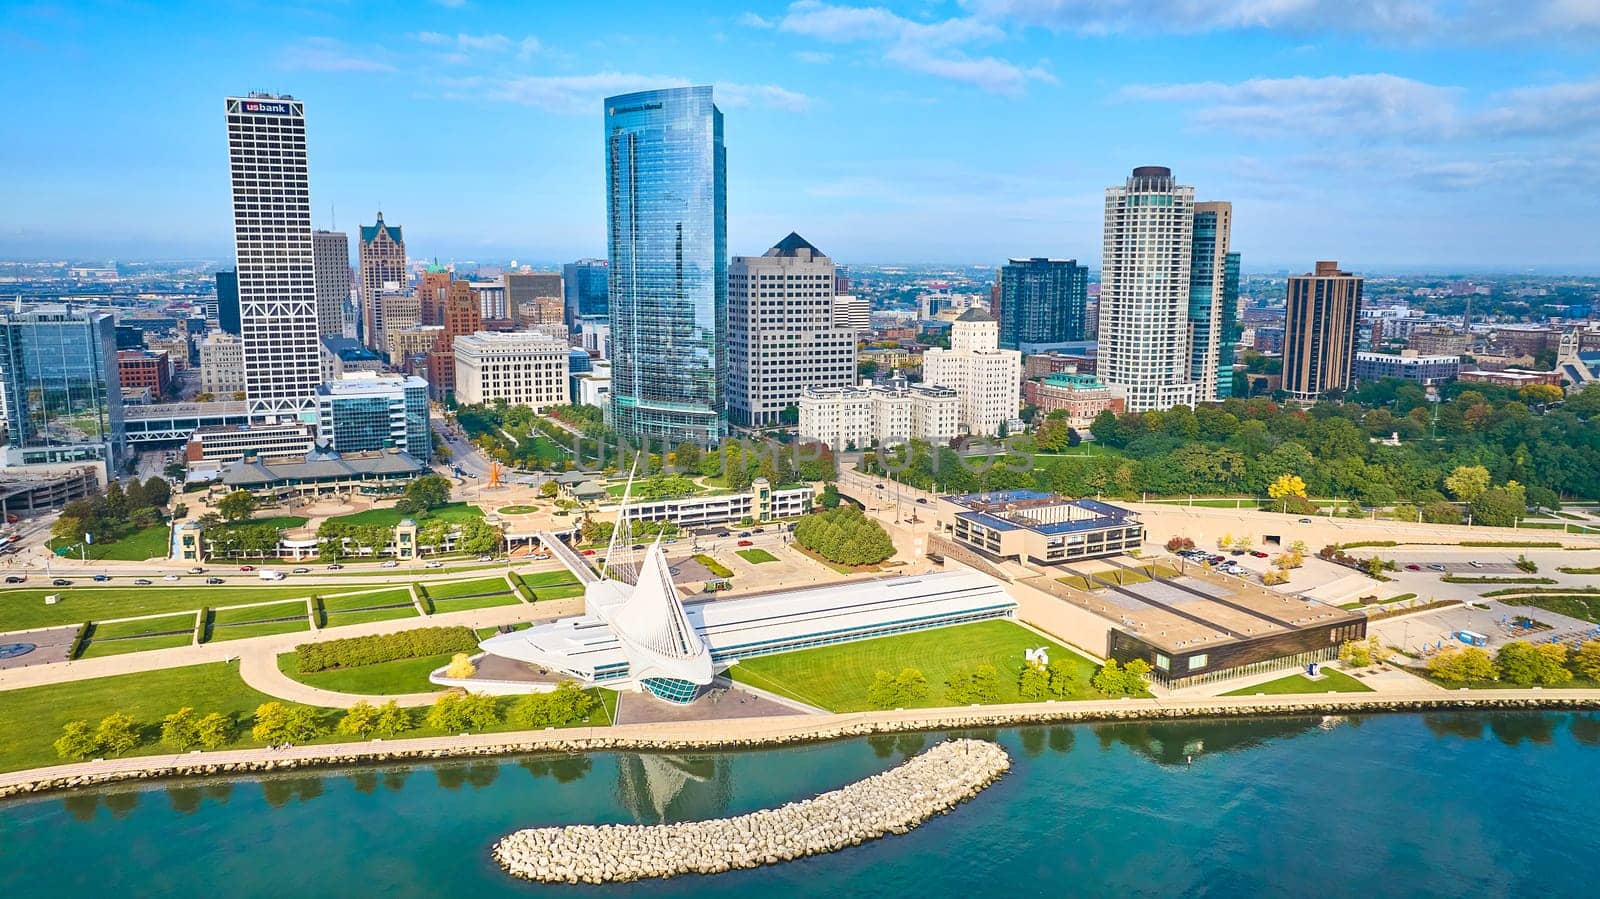 2023 Aerial View of Milwaukee, Showcasing Vibrant Cityscape with High-Rise Buildings, Quadracci Pavilion, and Scenic Lake Michigan